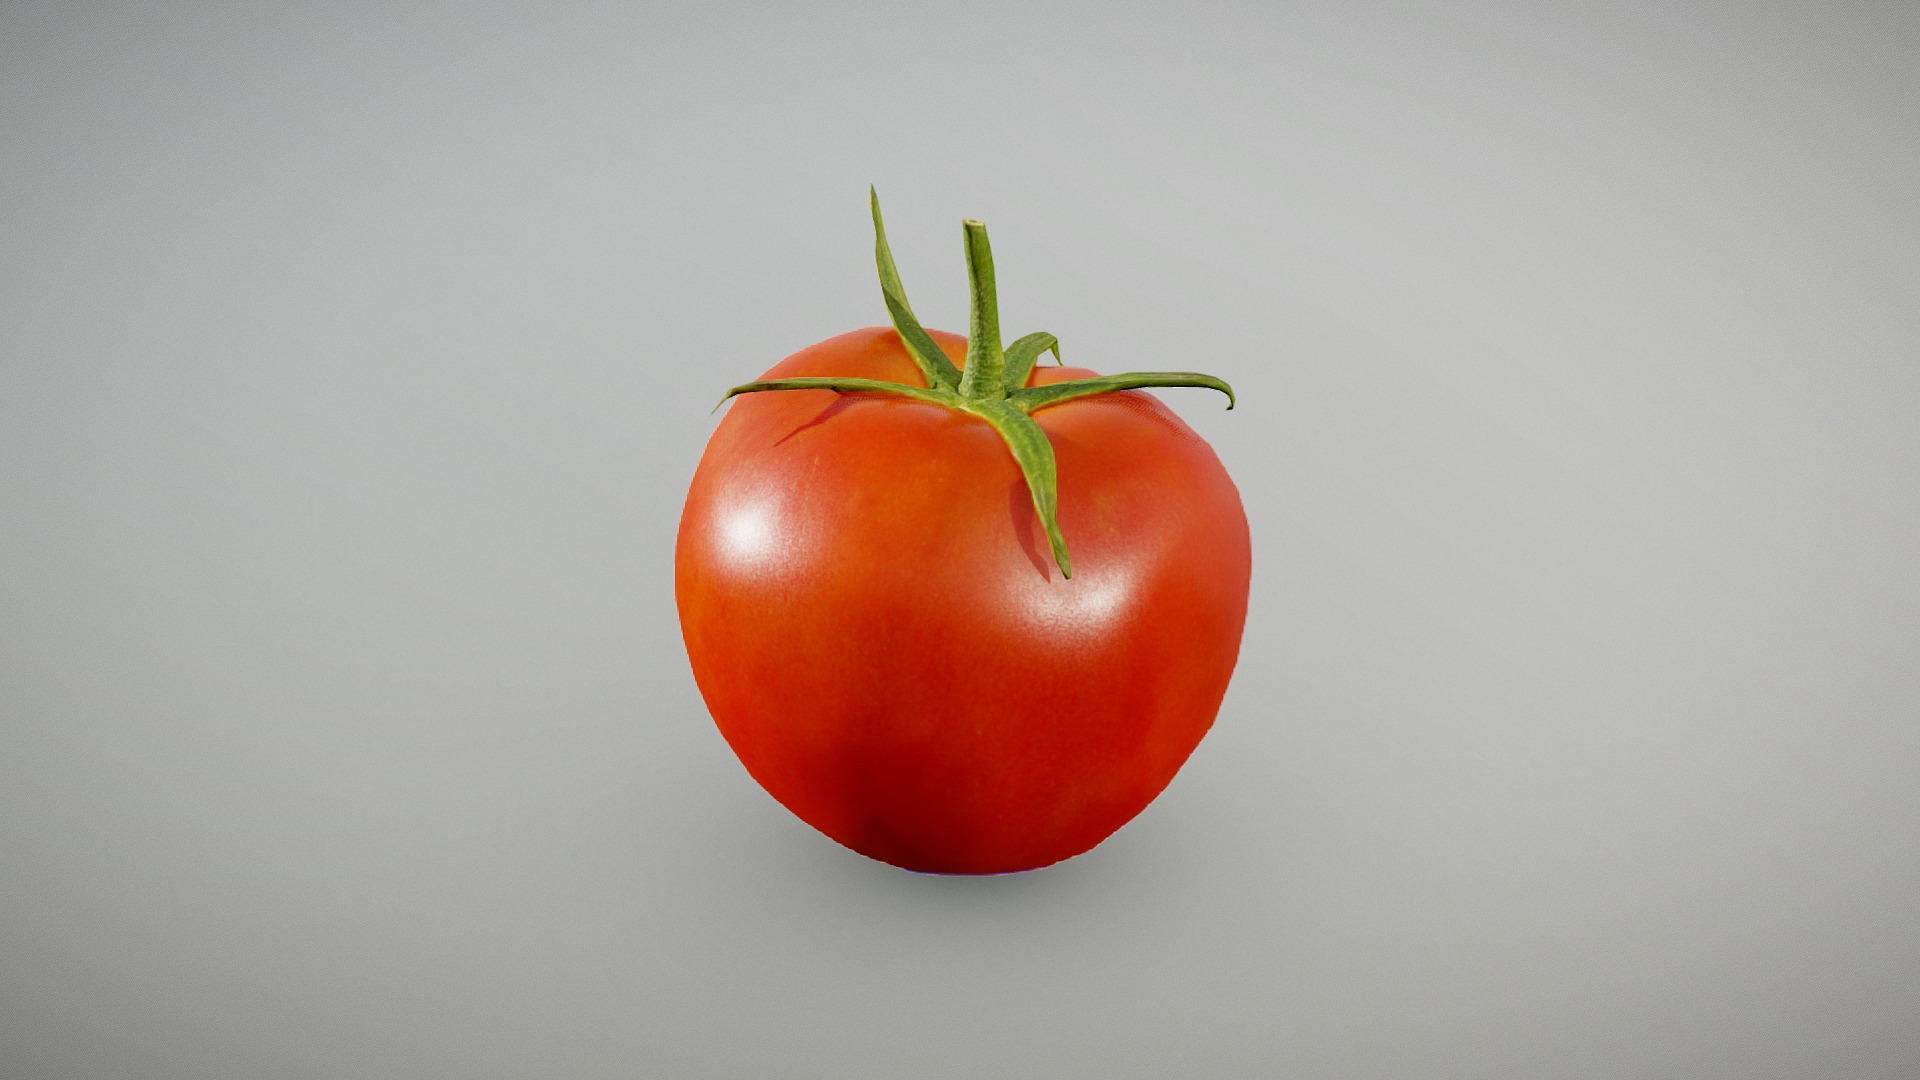 3D model Vine Ripe Tomato - This is a 3D model of the Vine Ripe Tomato. The 3D model is about a red tomato with a green stem.